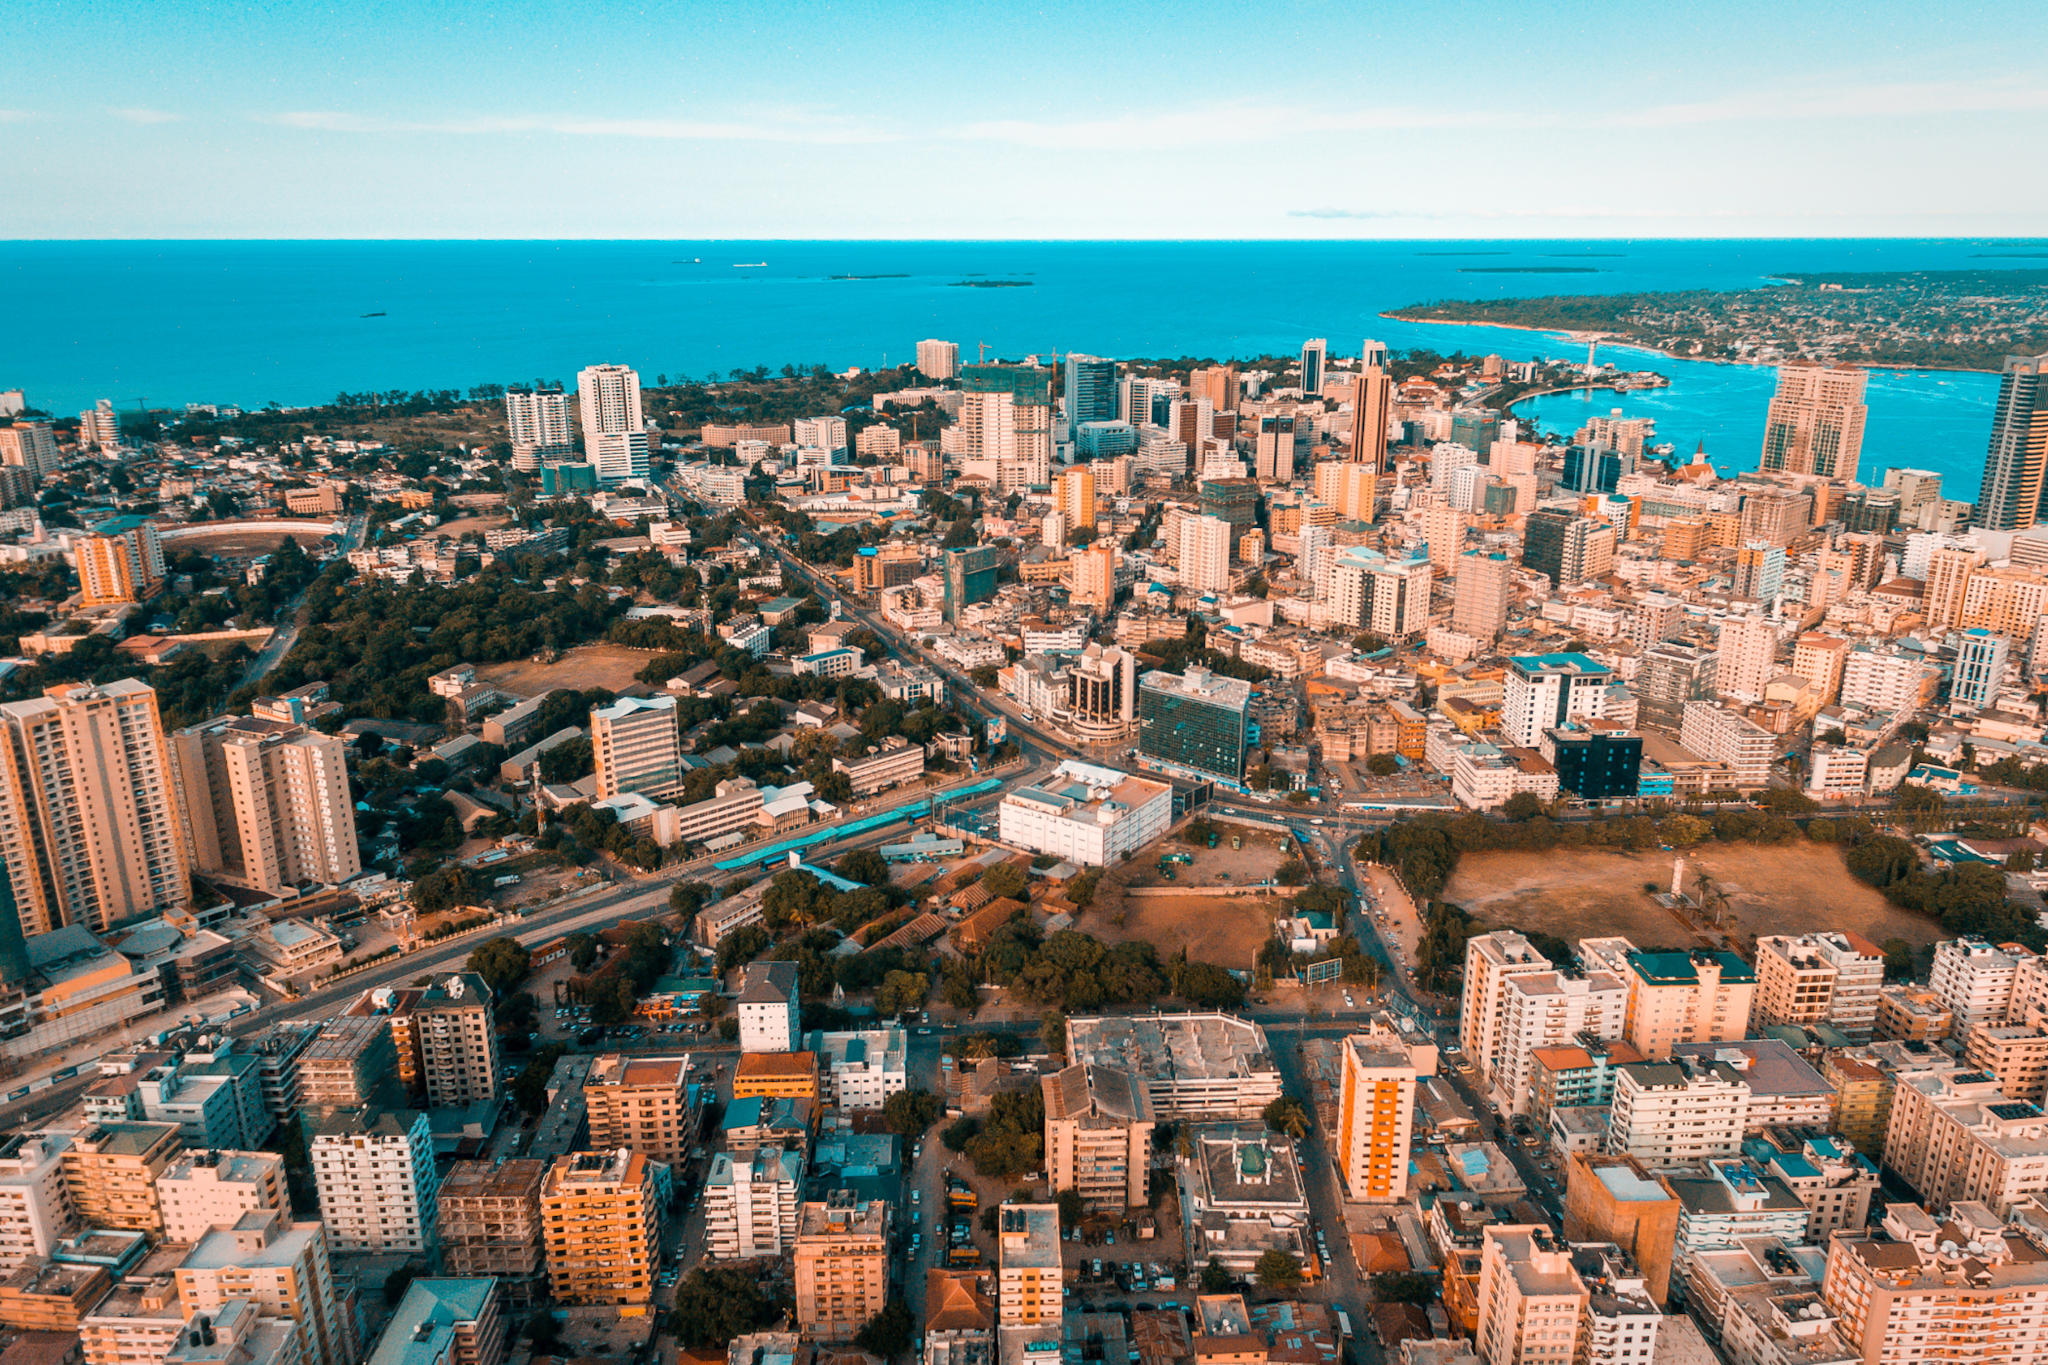 Cityscape of Dar es Salaam in Tanzania. Photo: Canva image - https://www.canva.com/photos/MAD1-iyfyLY-dar-es-salaam-city-scape/